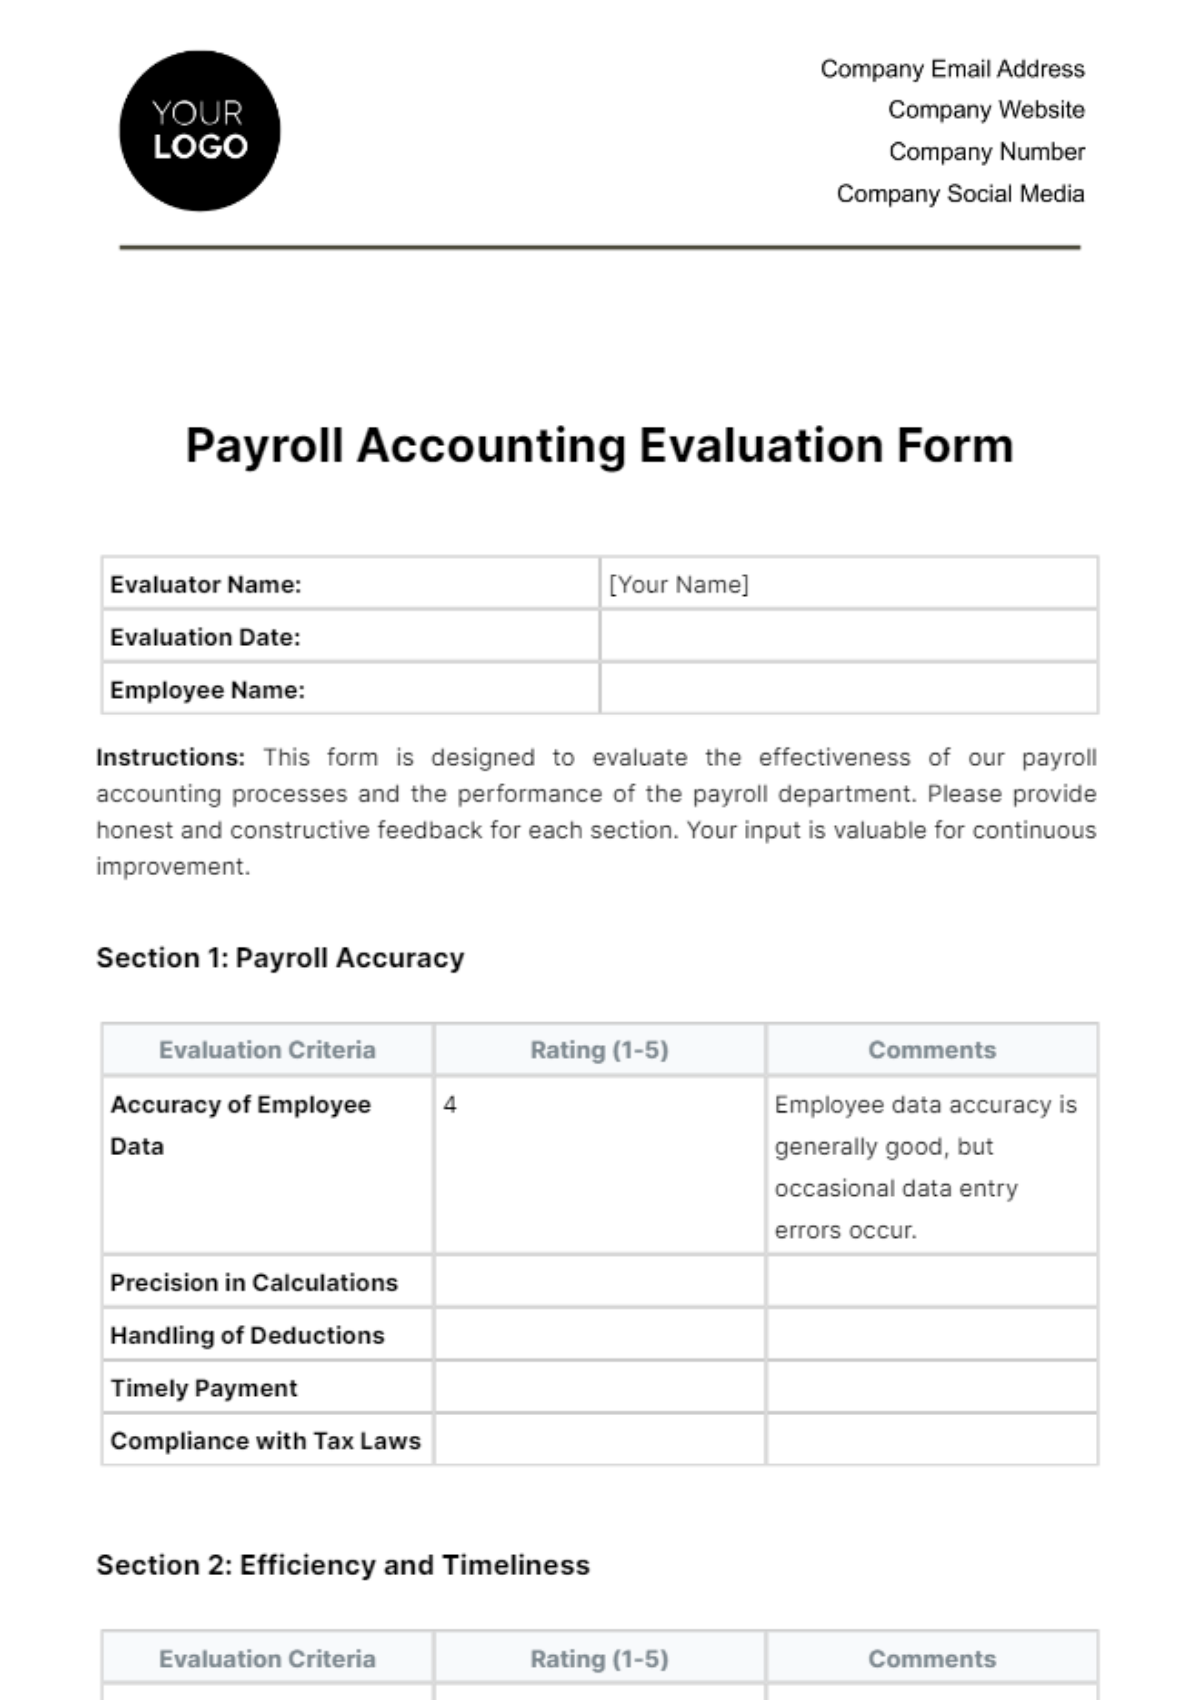 Free Payroll Accounting Evaluation Form Template